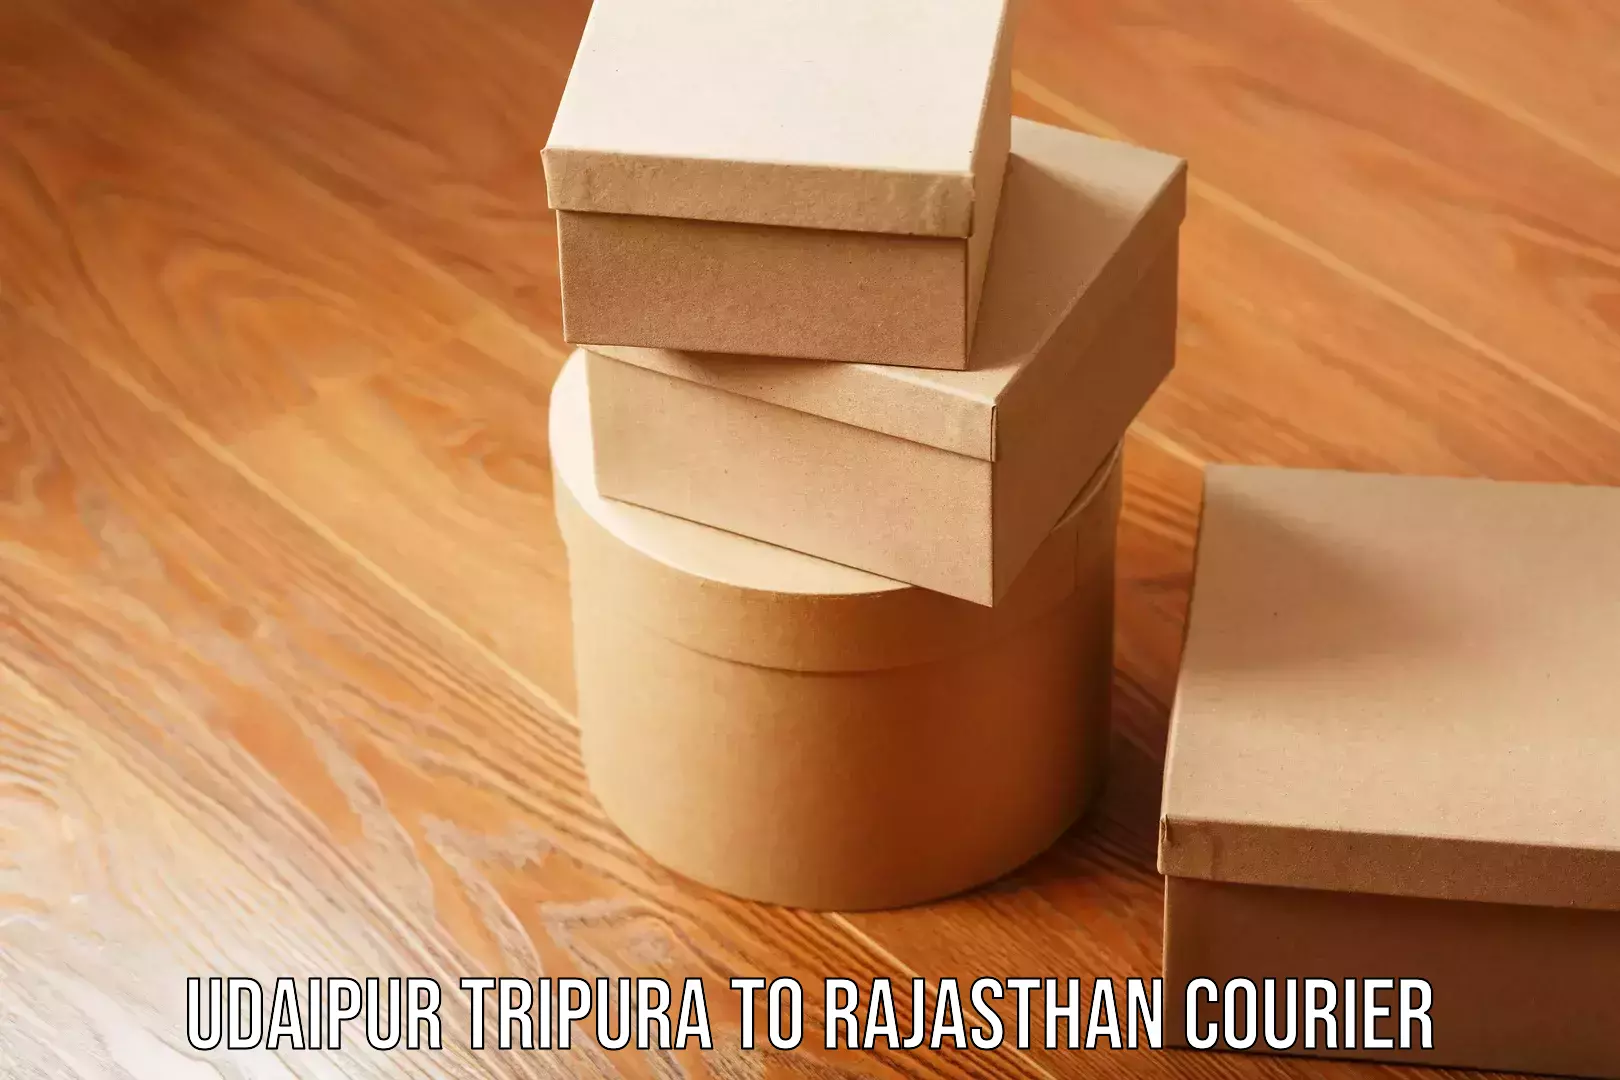 Reliable delivery network Udaipur Tripura to Rajasthan